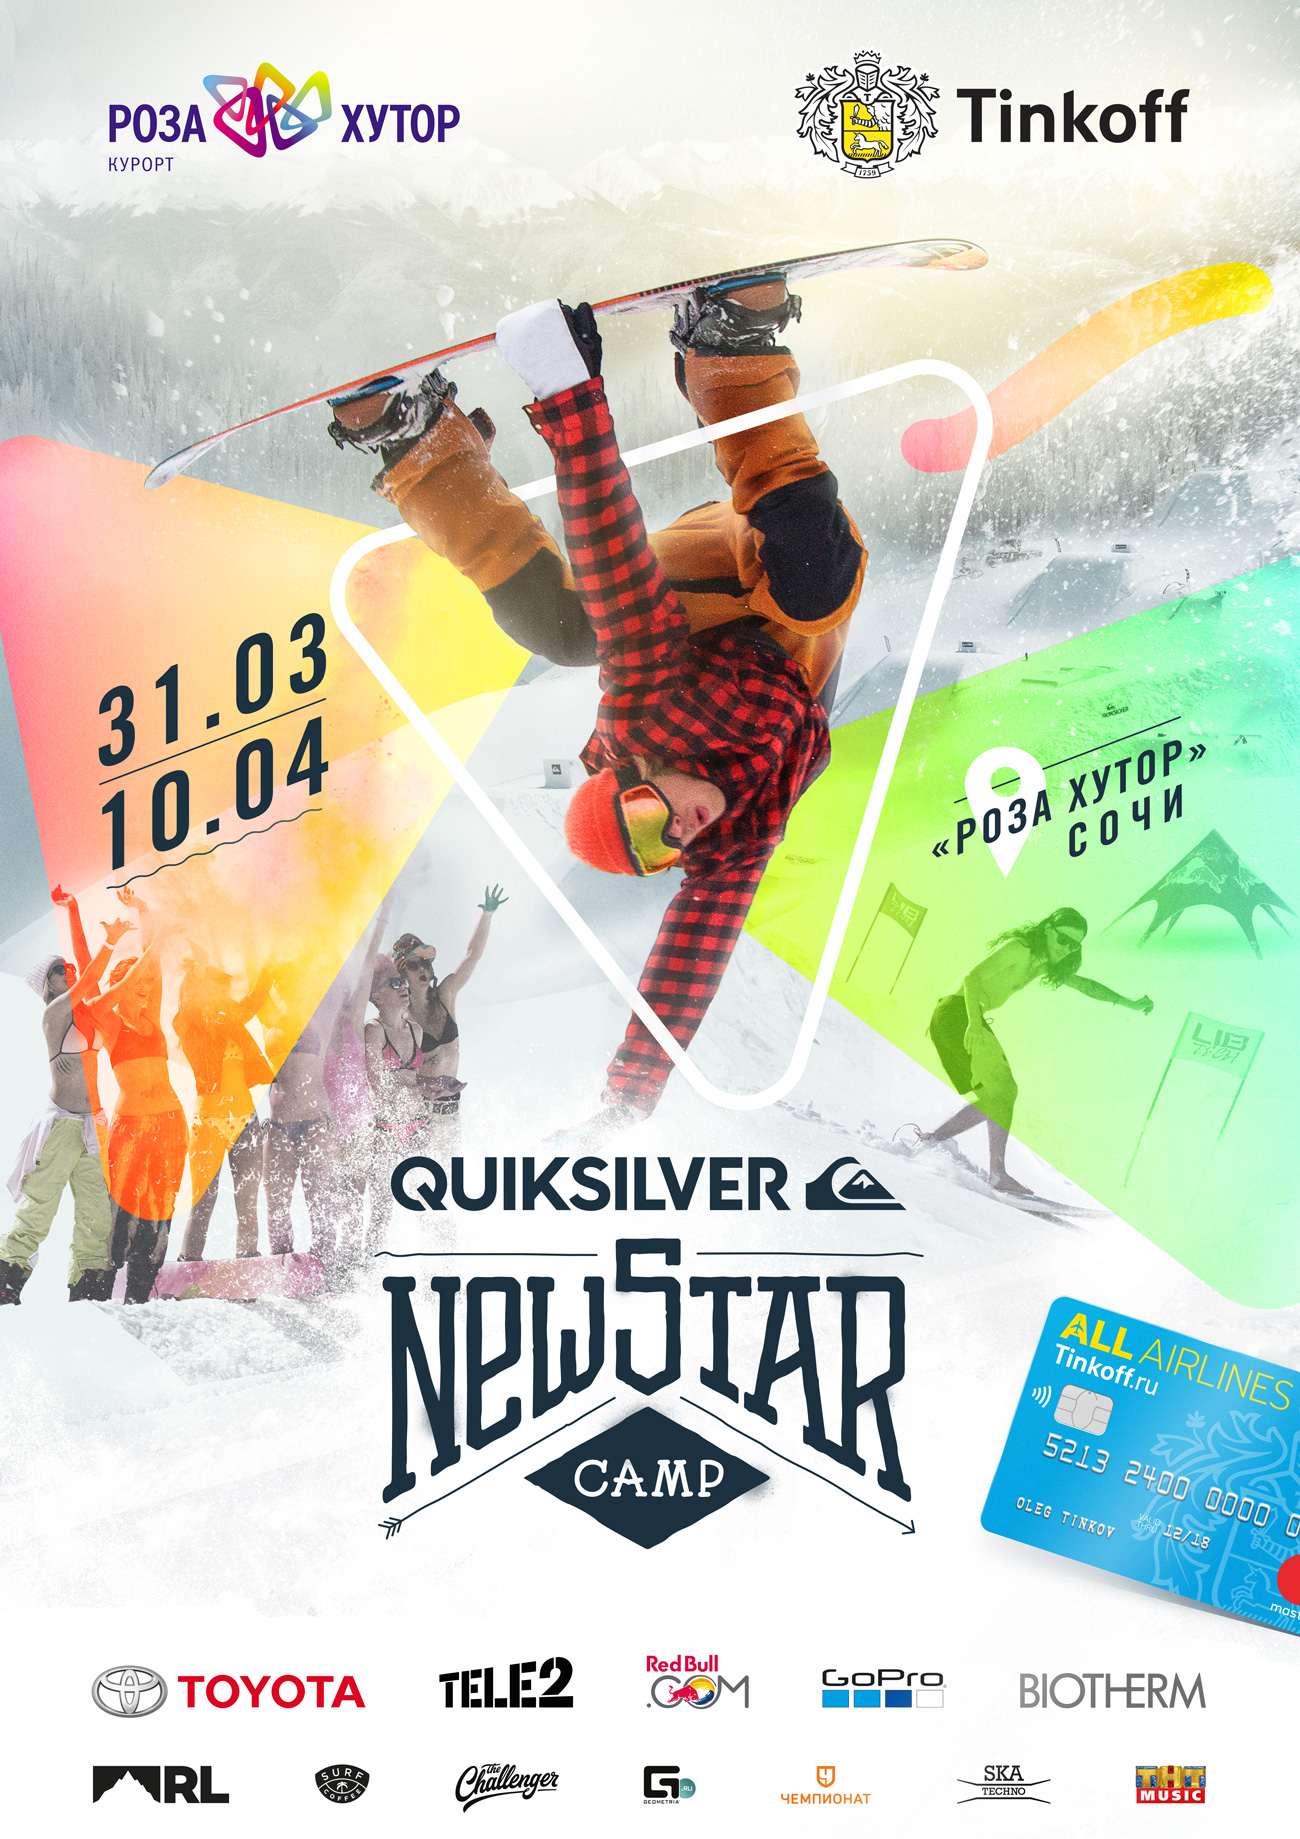 Quiksilver New Star Camp 